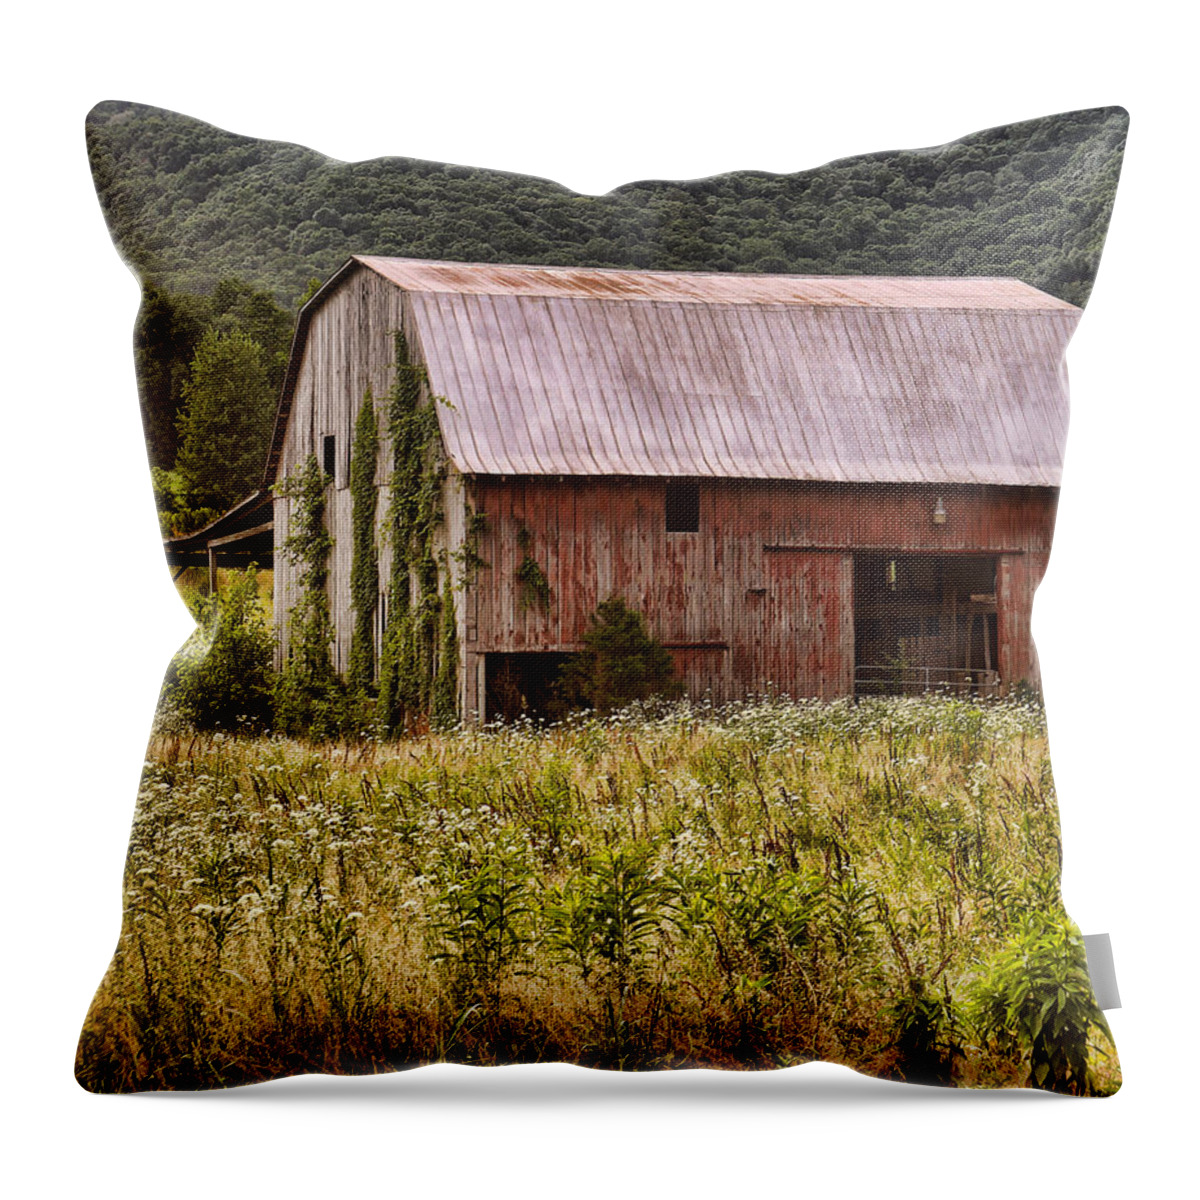 Barn Throw Pillow featuring the photograph Rustic Country Barn by TnBackroadsPhotos